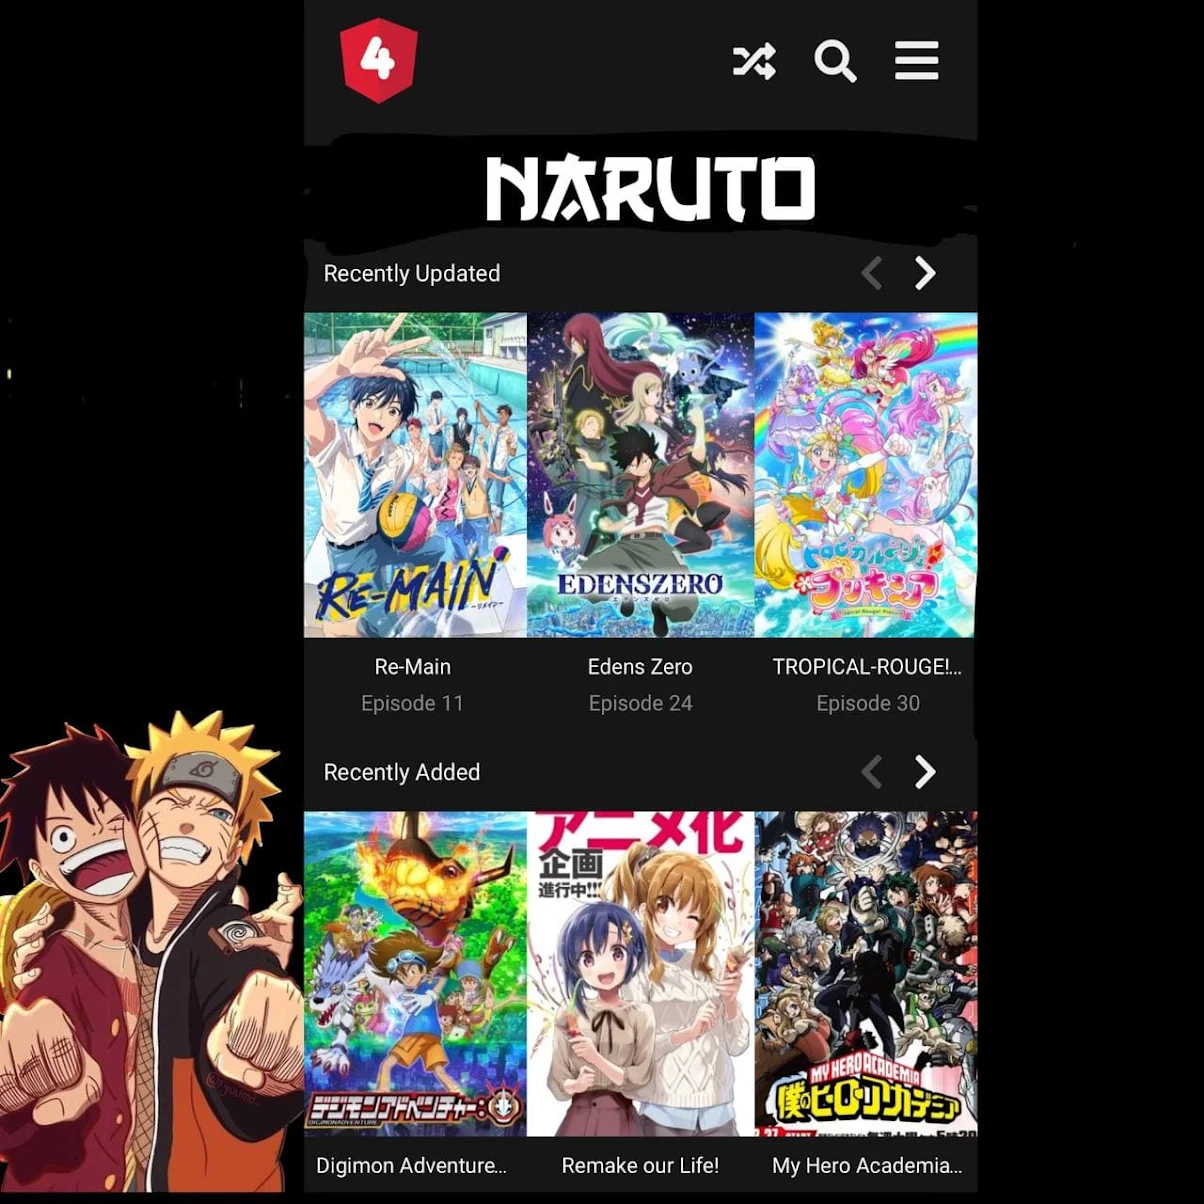 9anime  Watch Anime TV English Sub APK for Android Download